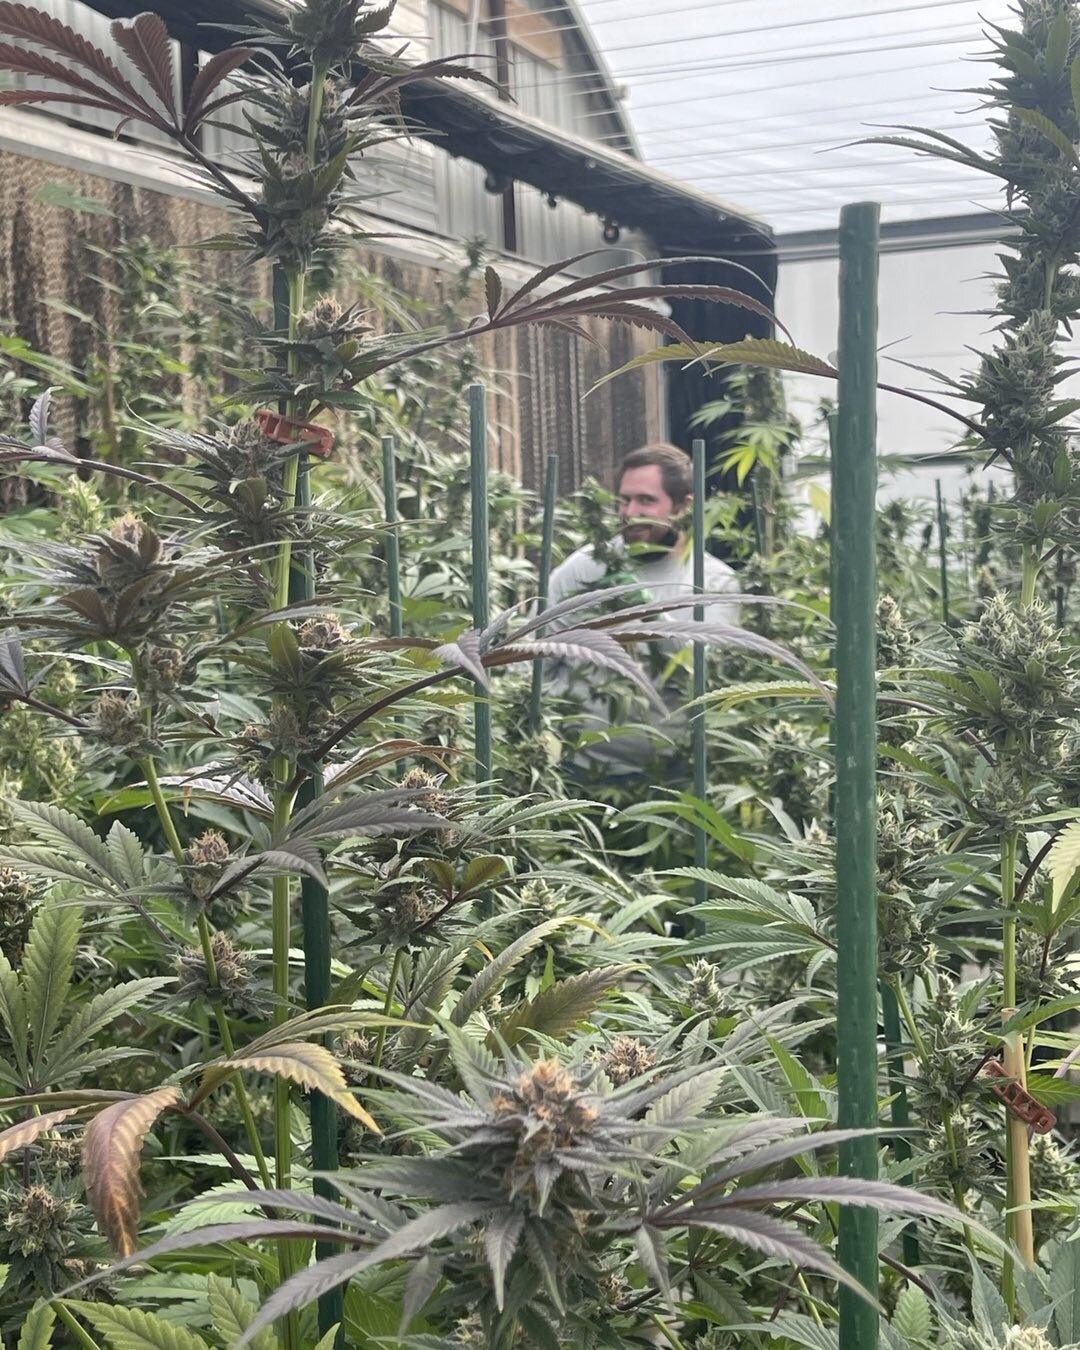 When you&rsquo;re cruising the greenhouse and your head of cultivation pops up out of the new crosses looking all happy AF.🌿 👀🌿 #cherrydiesel #lemondiesel #watermelon #abacusdiesel #hempflower #cbdflower #greenhousegrown #bredinhouse #coloradogrow